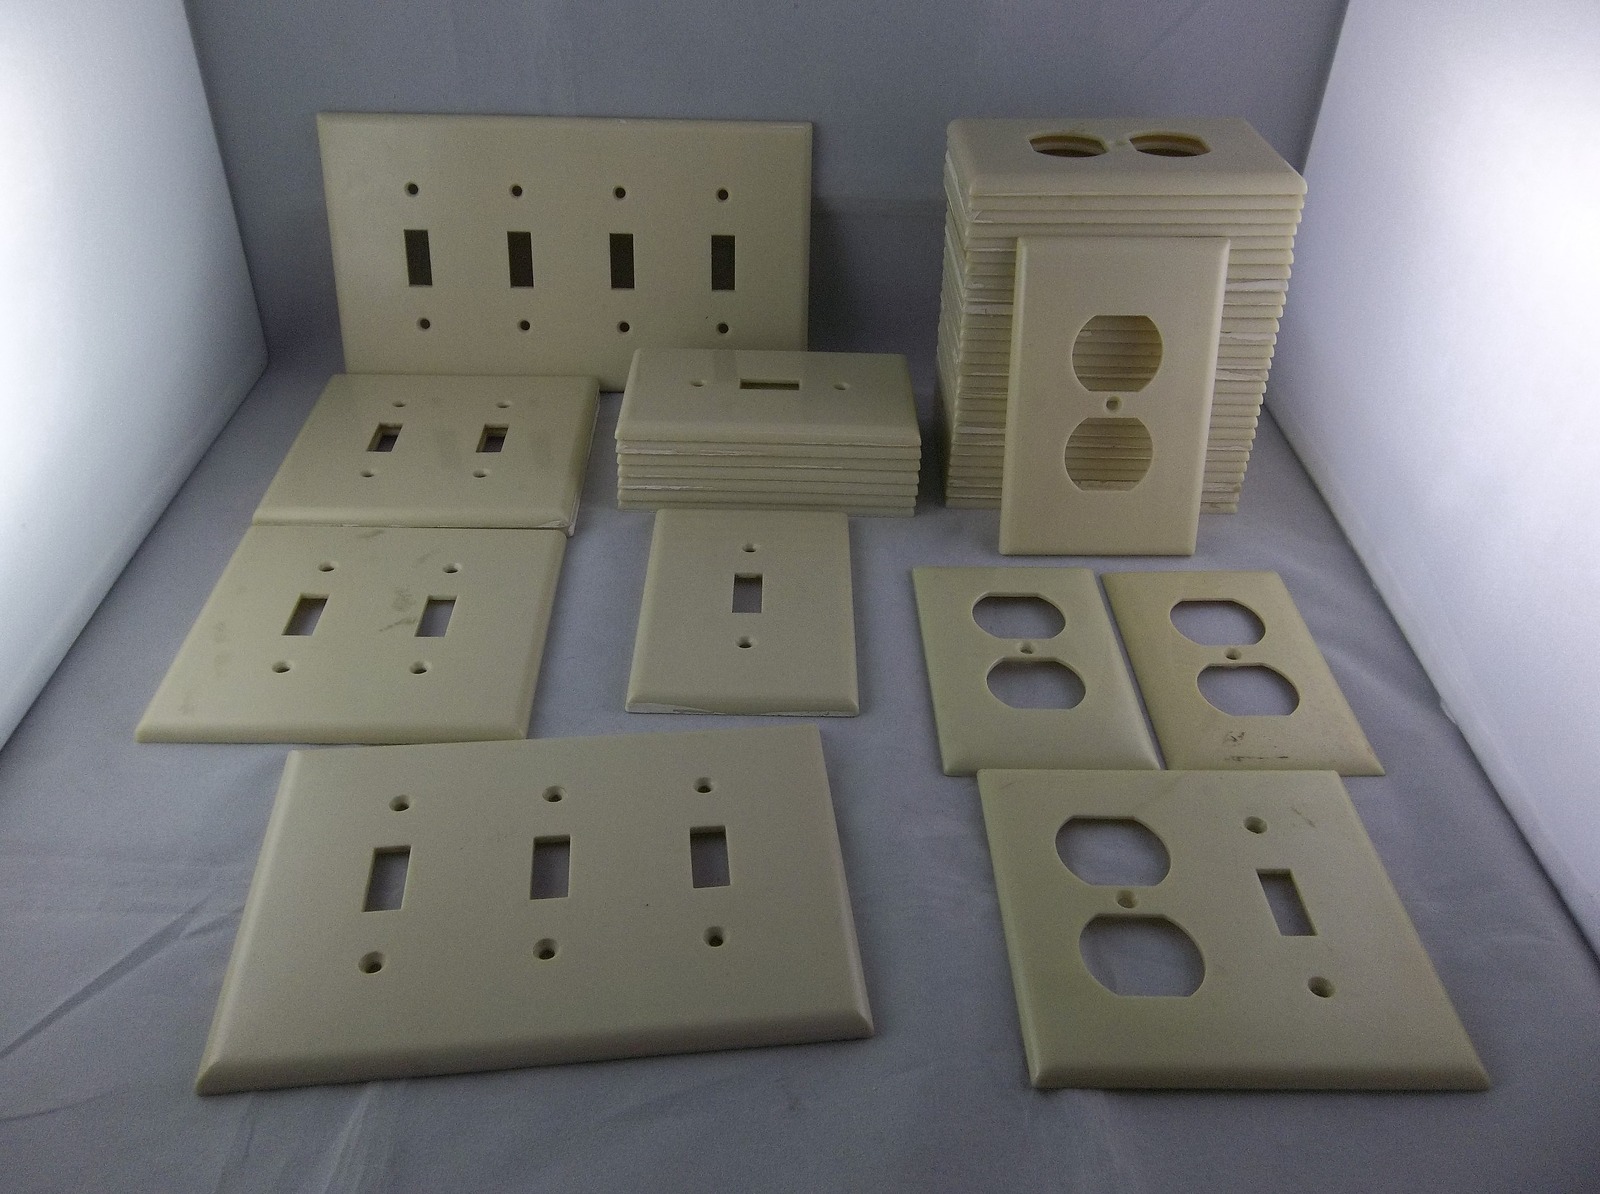 Lot Of 44 Beige Ivory Leviton Electrical Outlet Light Switch Wall Face Plates - $20.00